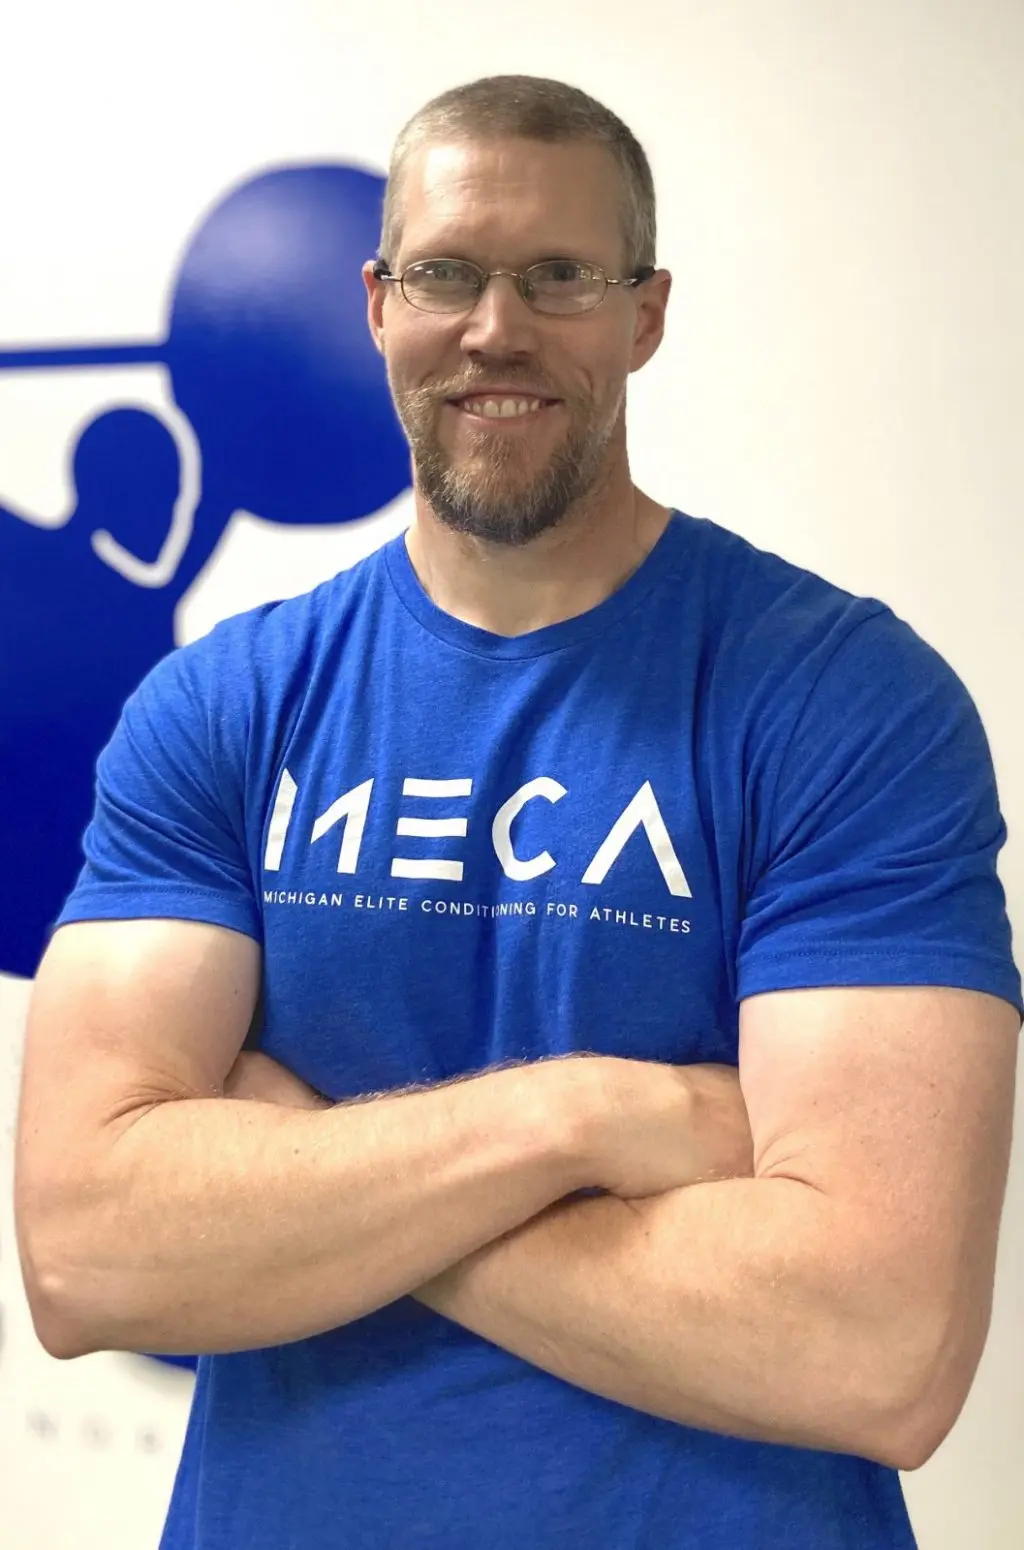 An headshot image of john who is a training coach at MECA.